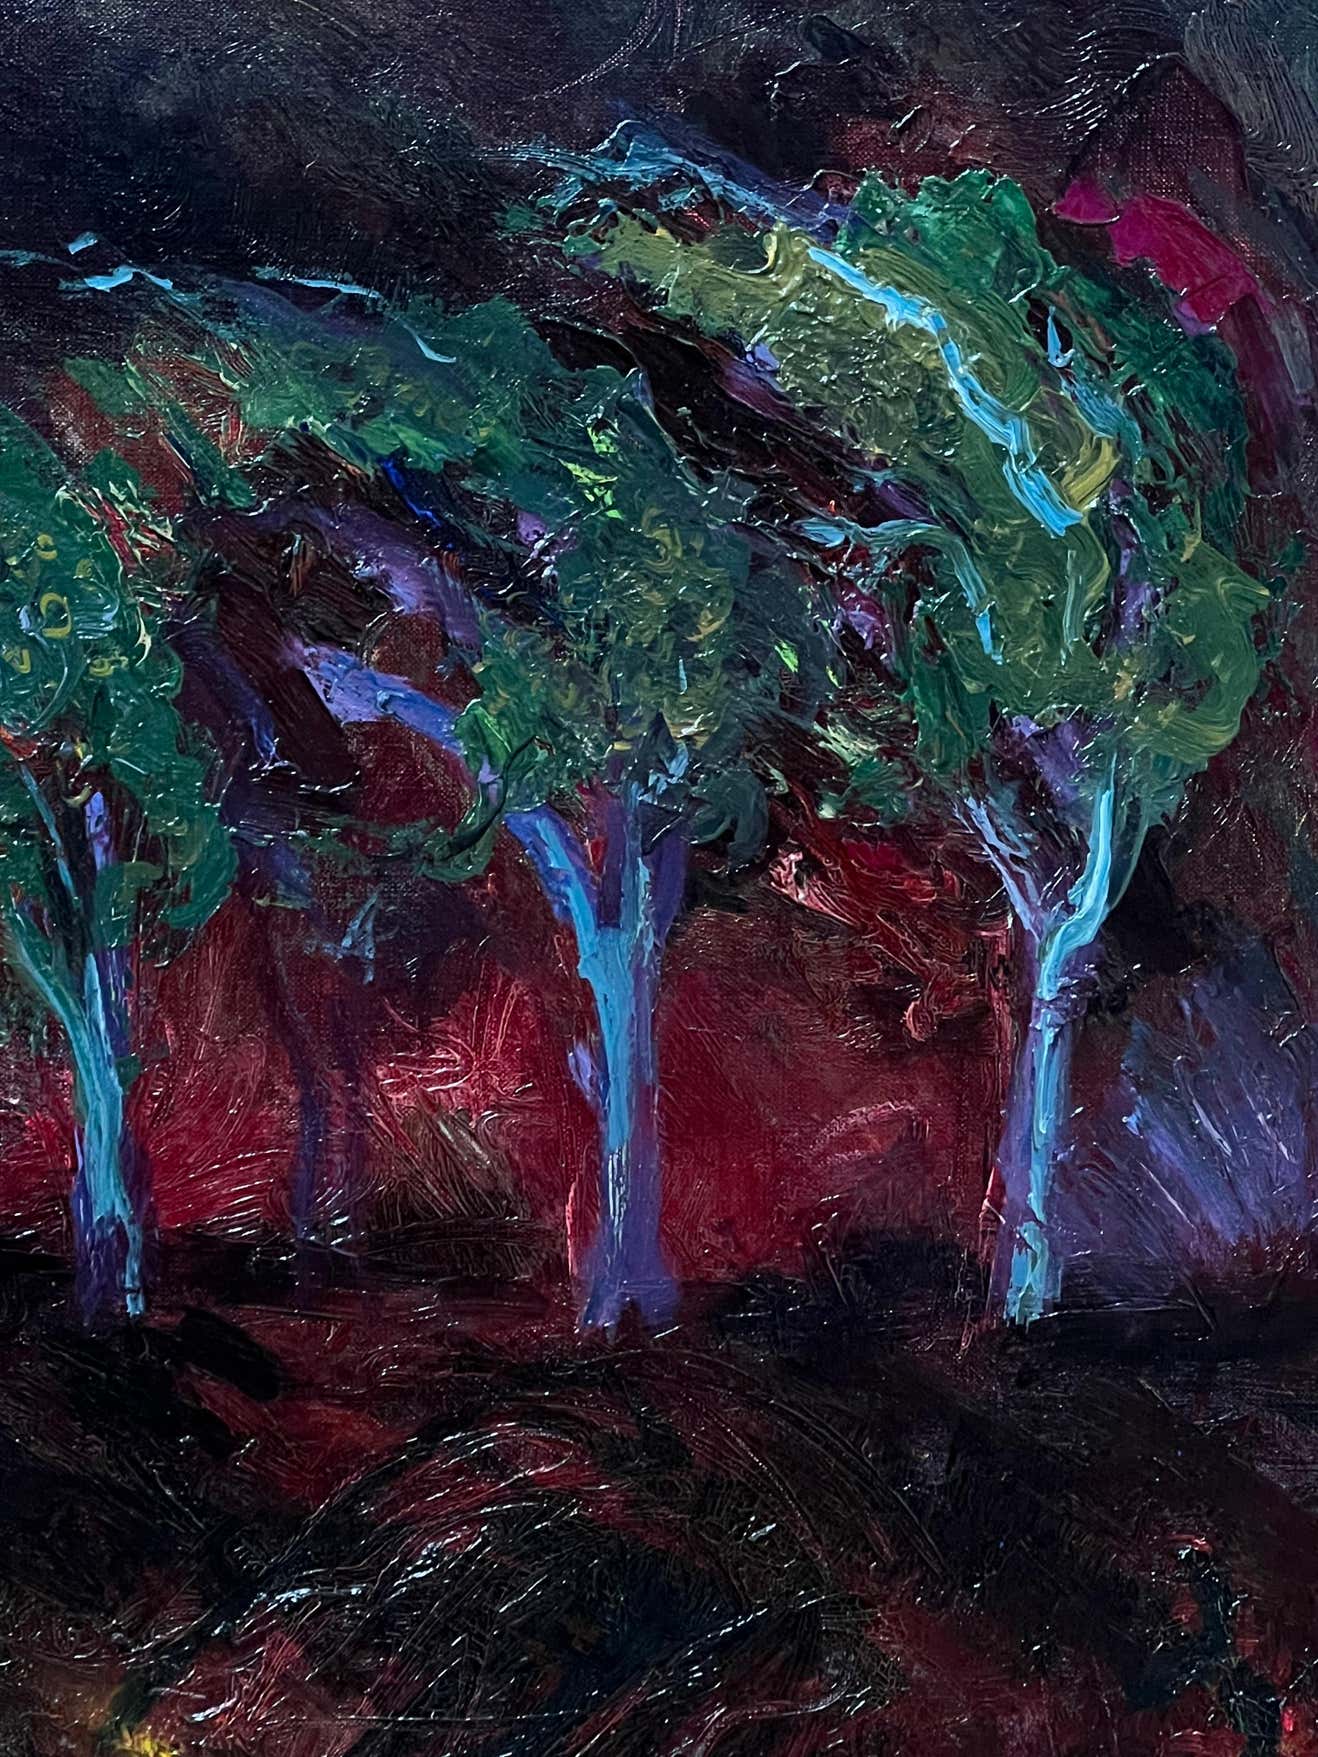 "Trees in a Raging Wildfire" Expressionist Landscape Oil Painting By Pat Berger